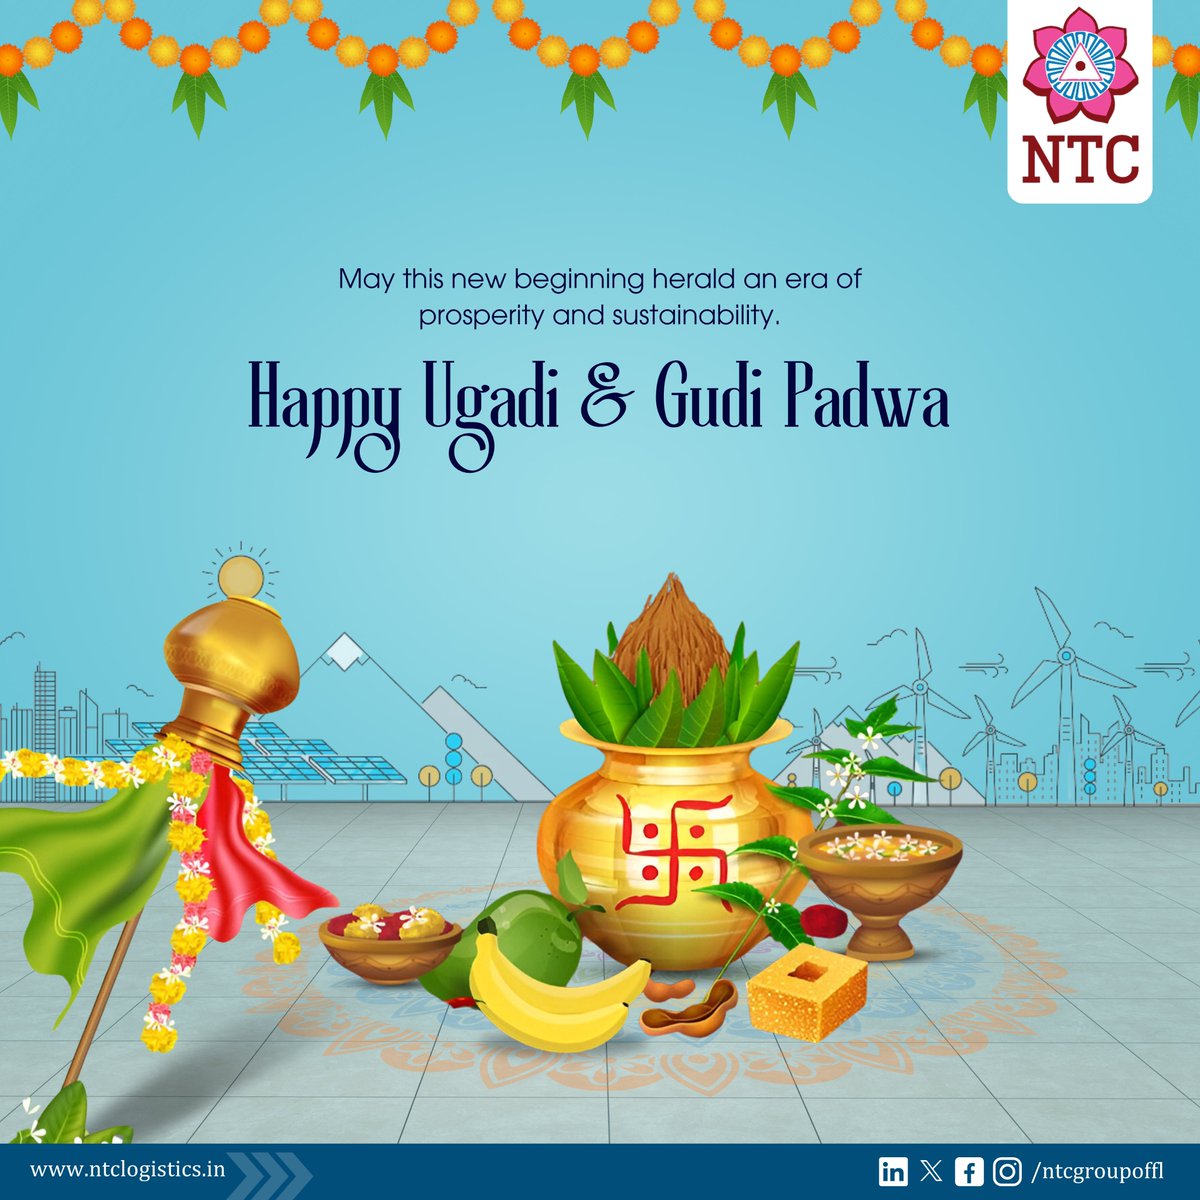 #HappyUgadi to all celebrating the dawn of a fresh start. May this auspicious occasion bring joy, prosperity, and success as we embark on a journey filled with endless possibilities. Wishing you a year filled with blessings and abundance!

#UgadiCelebration #NewYear #GudiPadwa